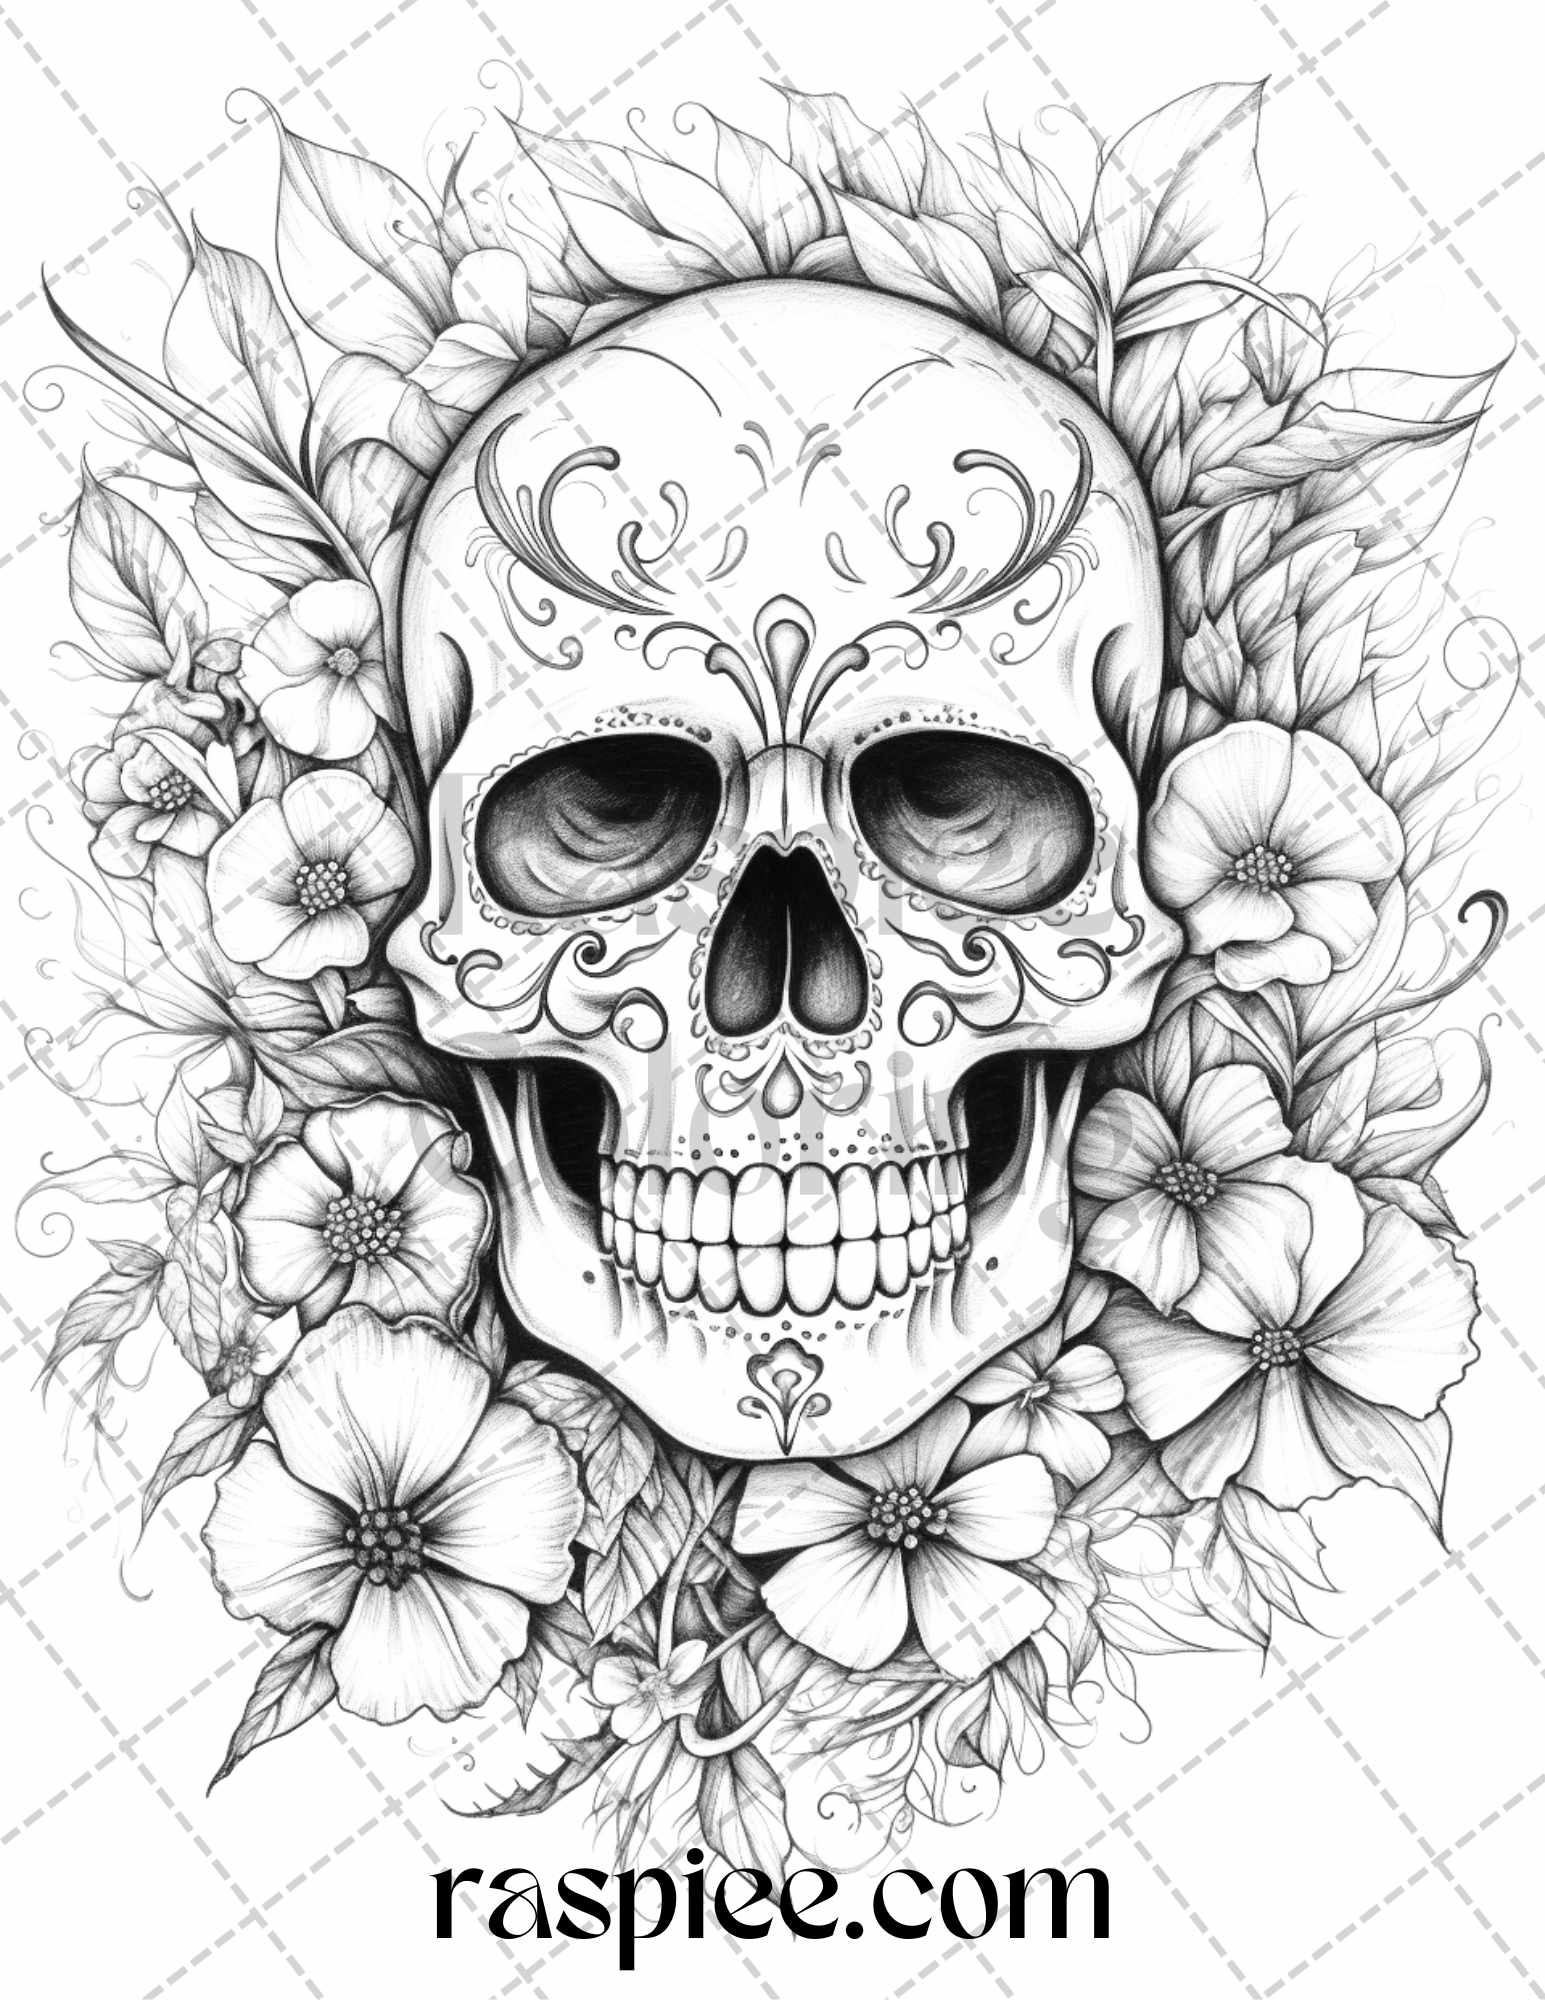 Floral skull grayscale coloring pages for adults stress relief col â coloring